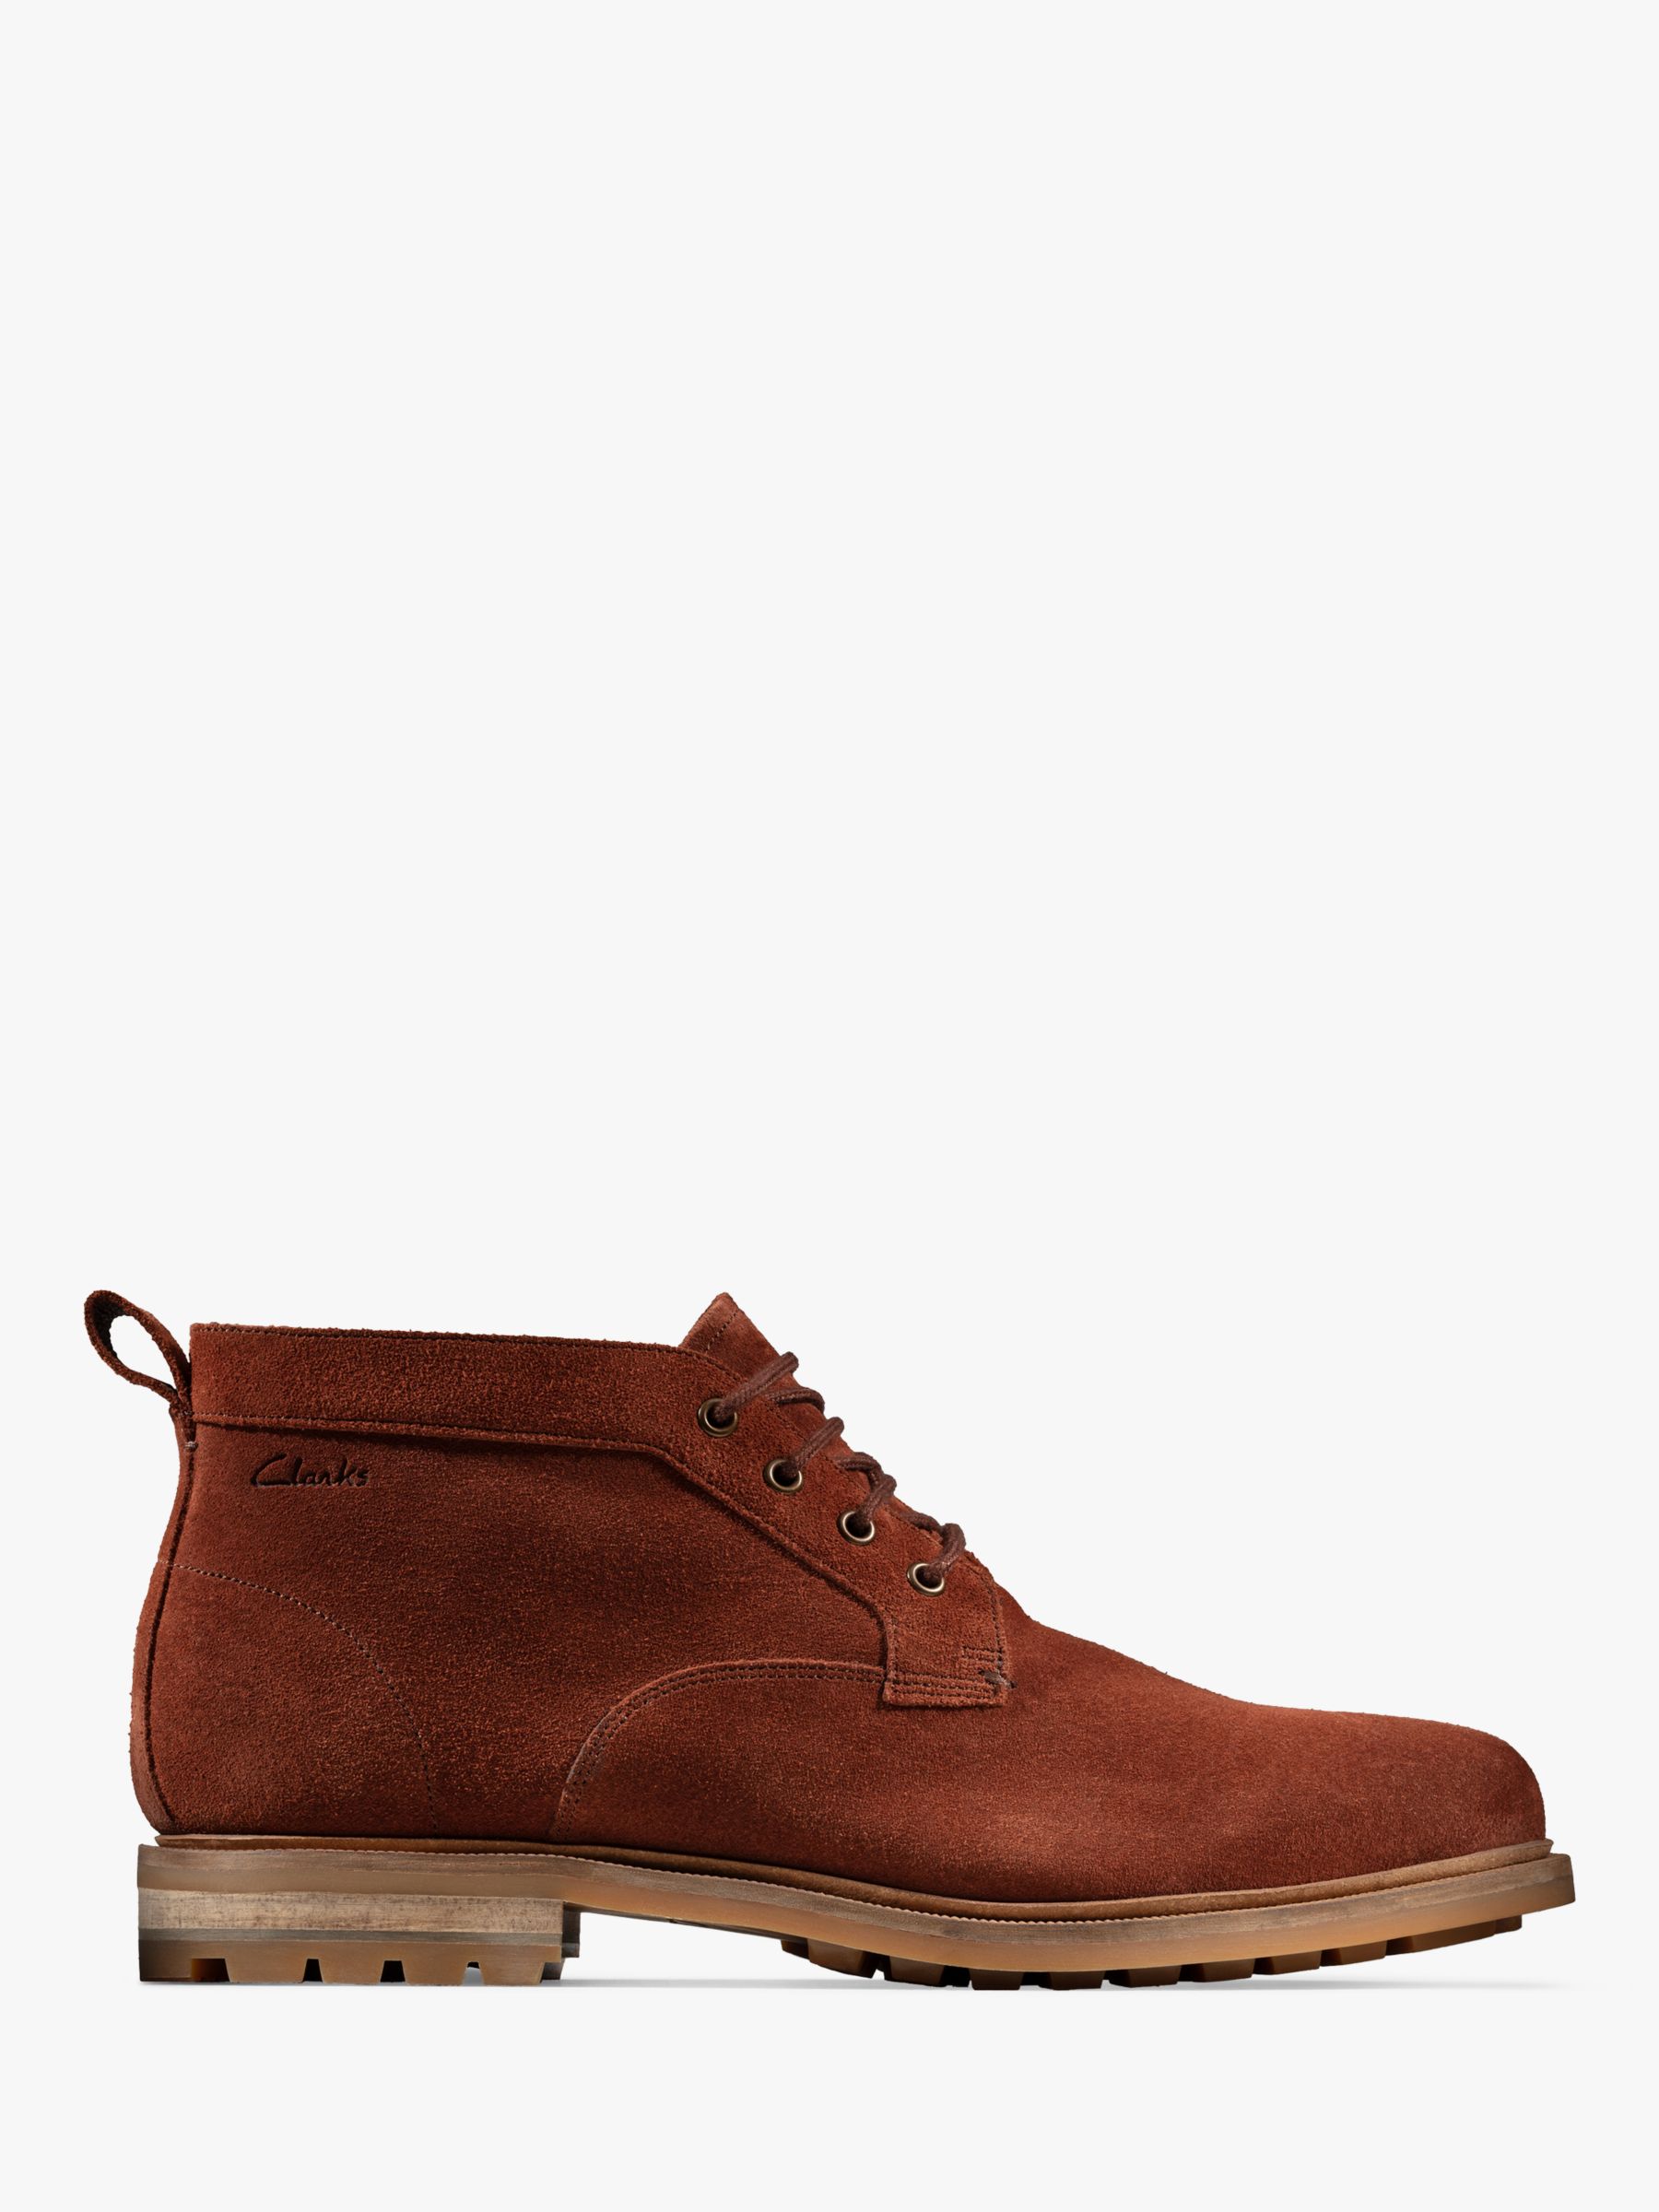 Clarks Foxwell Mid Suede Derby Boots